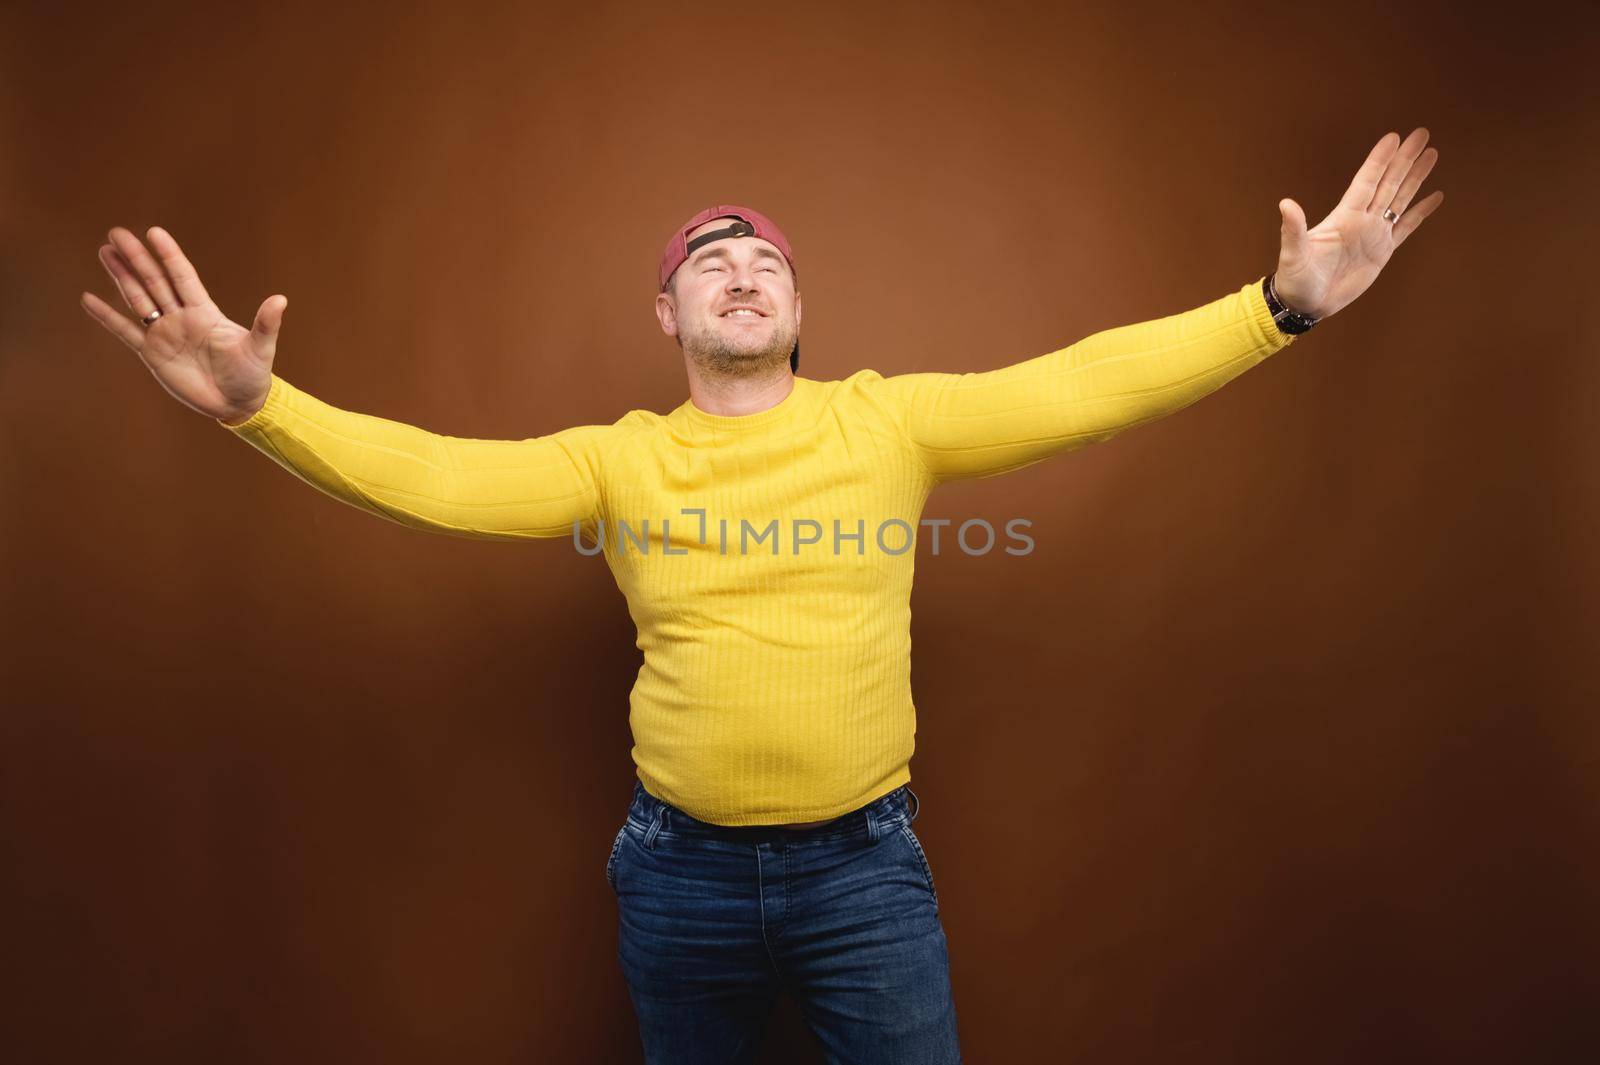 Caucasian plump middle-aged man dancing in the studio on a brown background. Studio portrait by yanik88